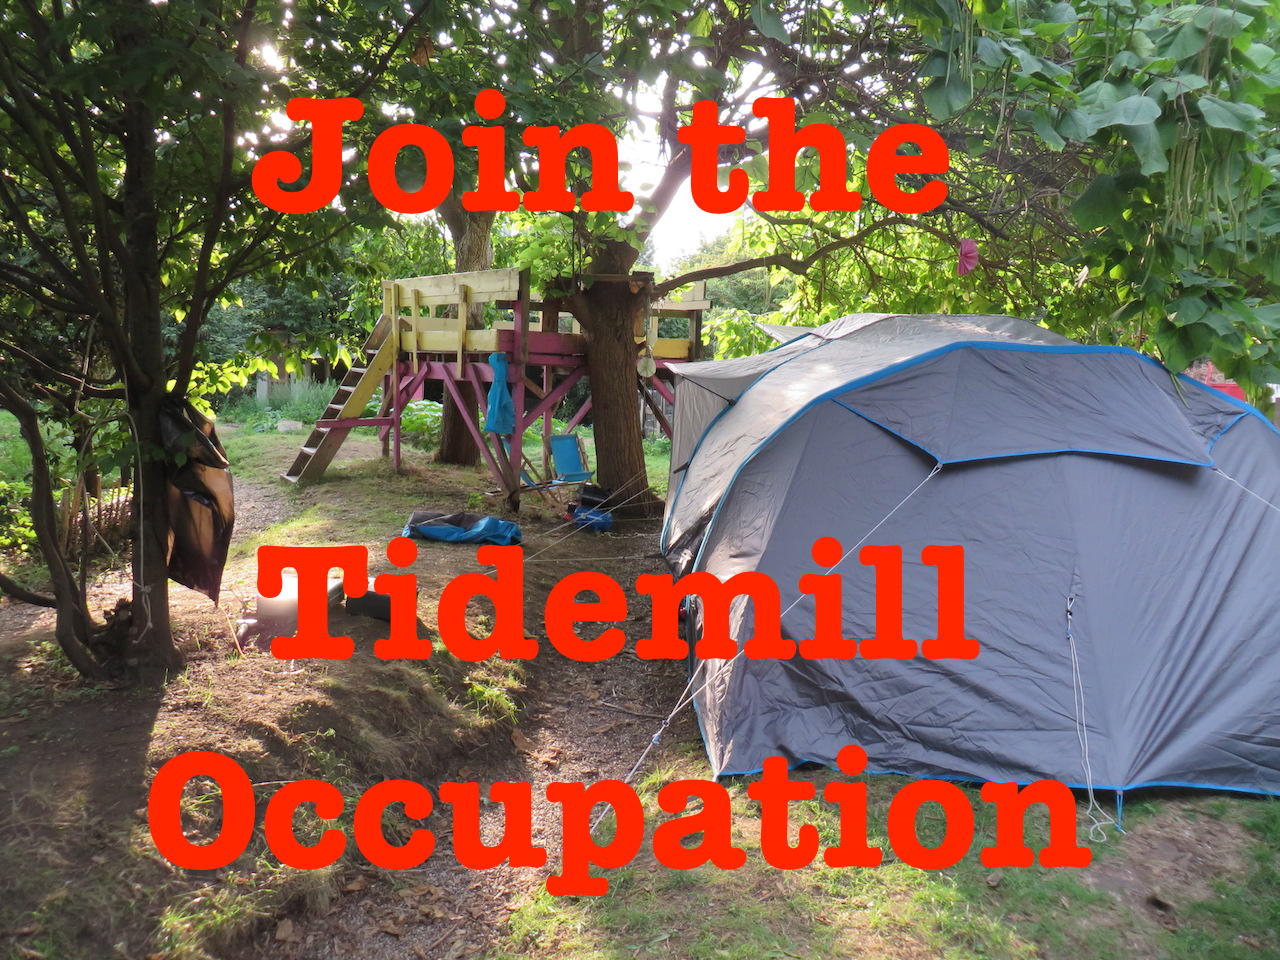 Join the Tidemill Occupation: an image I put together featuring a photo from the Old Tidemill Garden in Deptford on August 28, 2018, the evening the garden was occupied to prevent Lewisham Council from taking it back the day after, prior to its intended destruction.